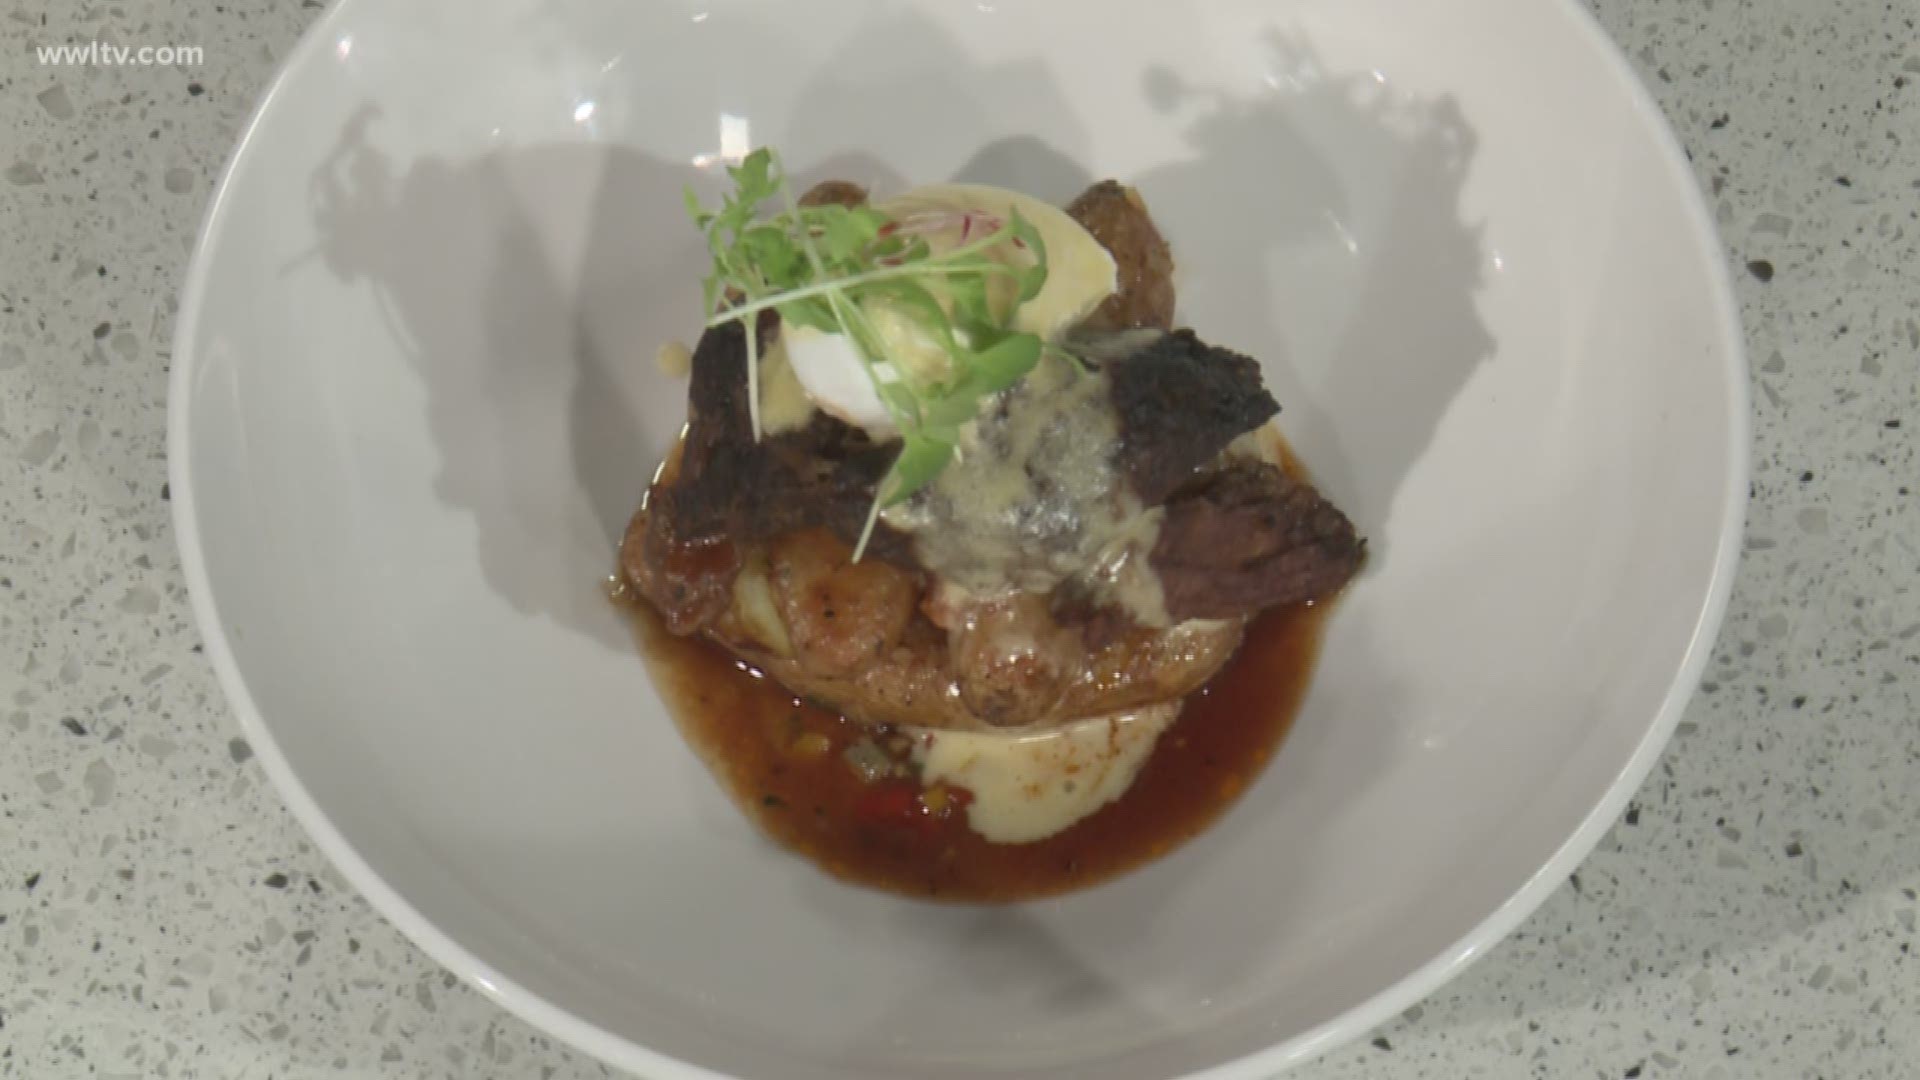 Los Angeles Chef Marlon Alexander is in the kitchen giving a preview of his New Orleans restaurant menu "Cru."